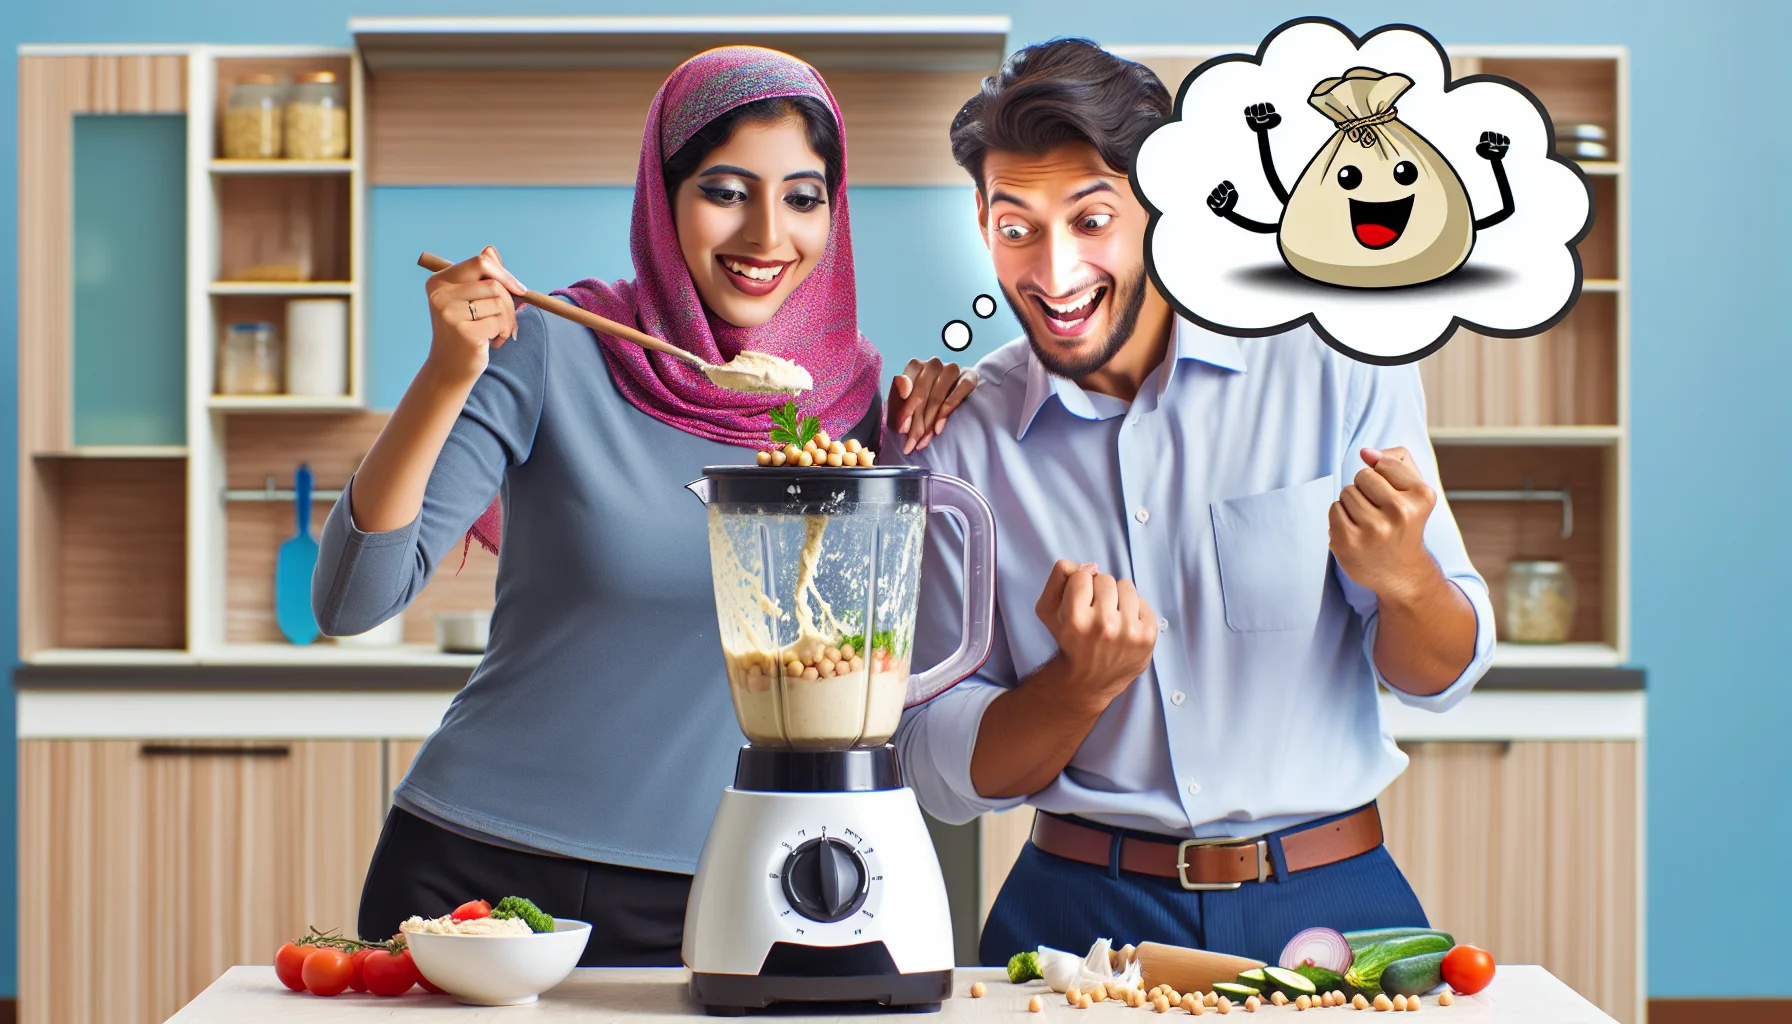 Depict a humorous and eye-catching scene of a South Asian woman and a Caucasian man making a delicious hummus recipe using a blender in a comfortably-decorated budget kitchen. The blender is energetically pulverizing the fresh ingredients for hummus, sending little splashes of humorously-shaped chickpeas flying in the air. You can see the excitement and delight on their faces as they realize they are eating healthy while saving money. Include a thought bubble over their heads featuring a cute happy dollar sign eating a bowl of hummus to symbolize the concept of 'eating healthy for less'.